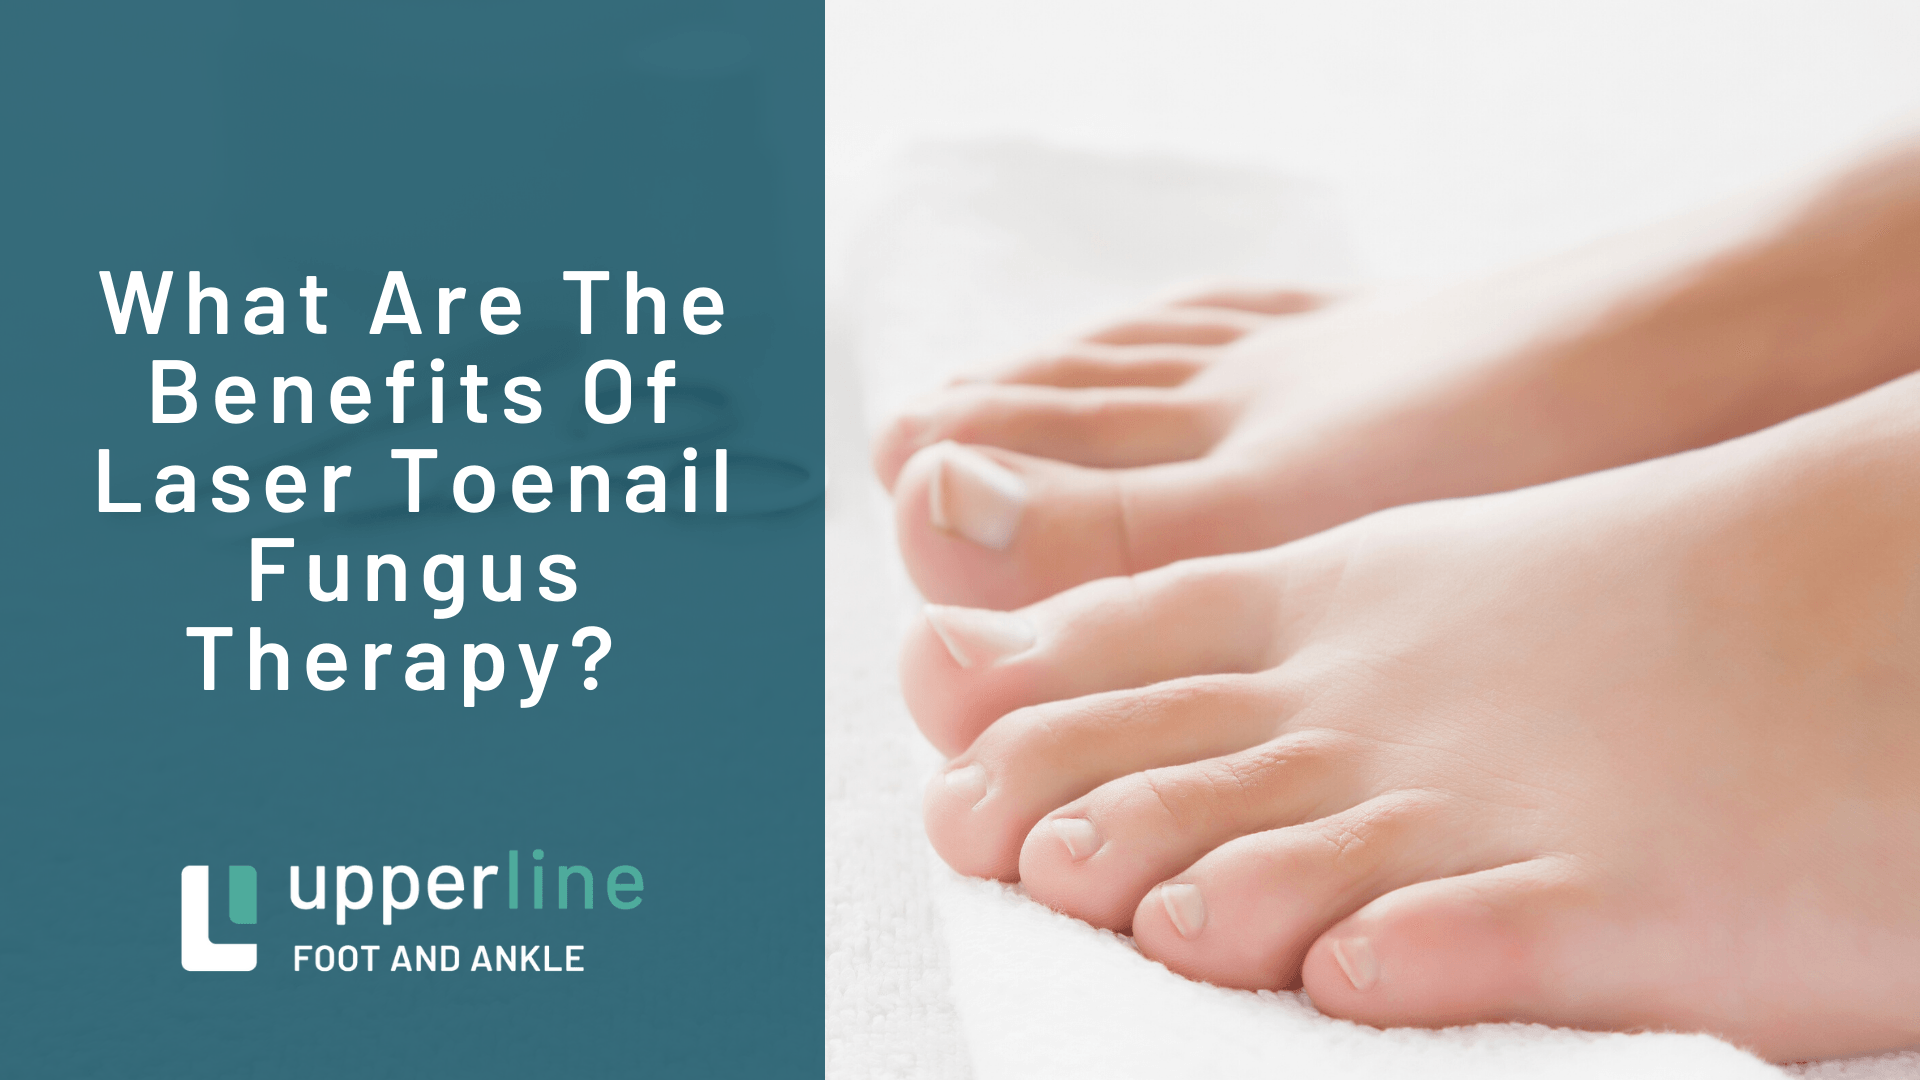 What Are The Benefits Of Laser Toenail Fungus Therapy?